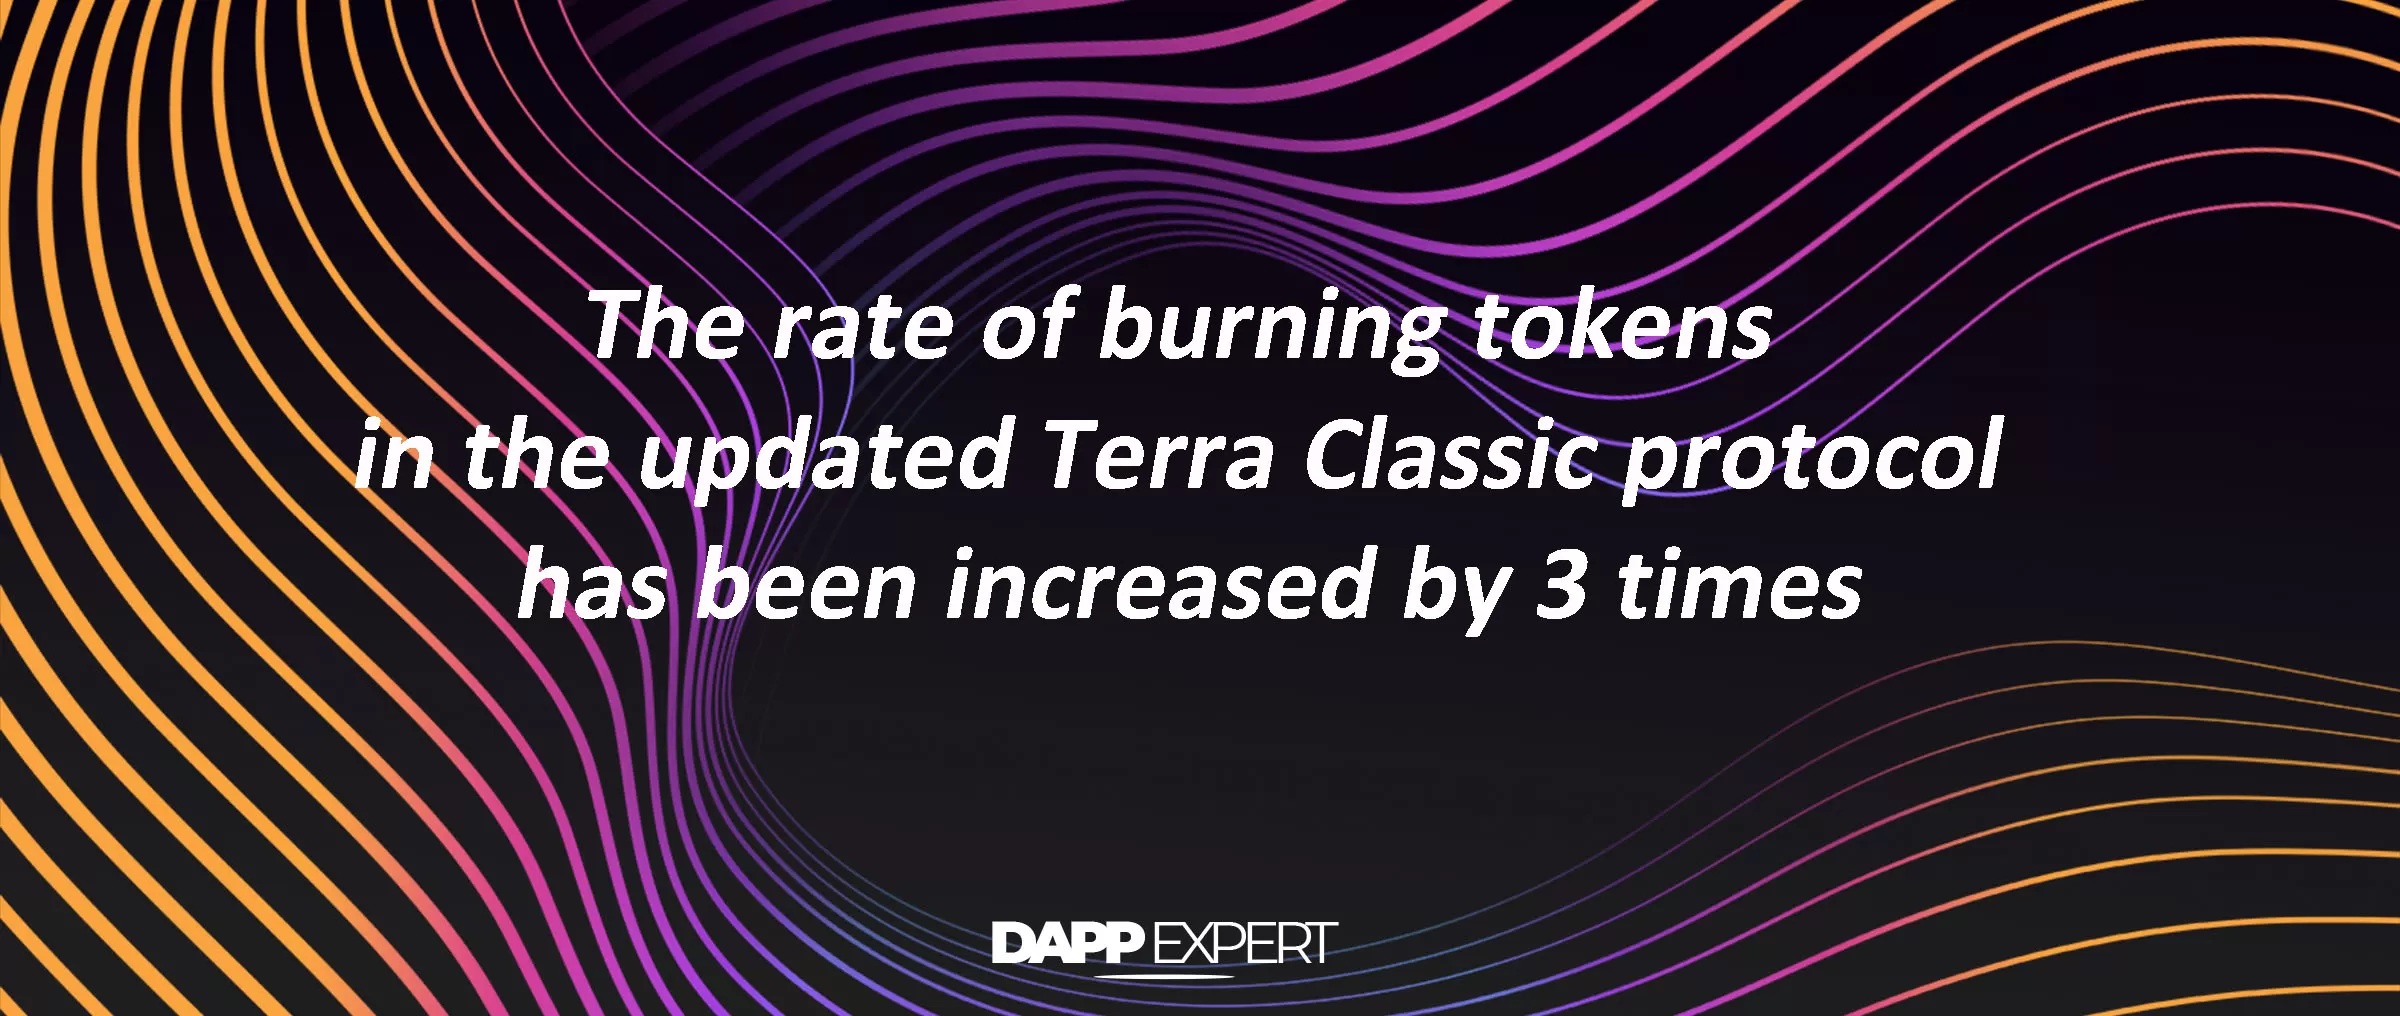 The rate of burning tokens in the updated Terra Classic protocol has been increased by 3 times